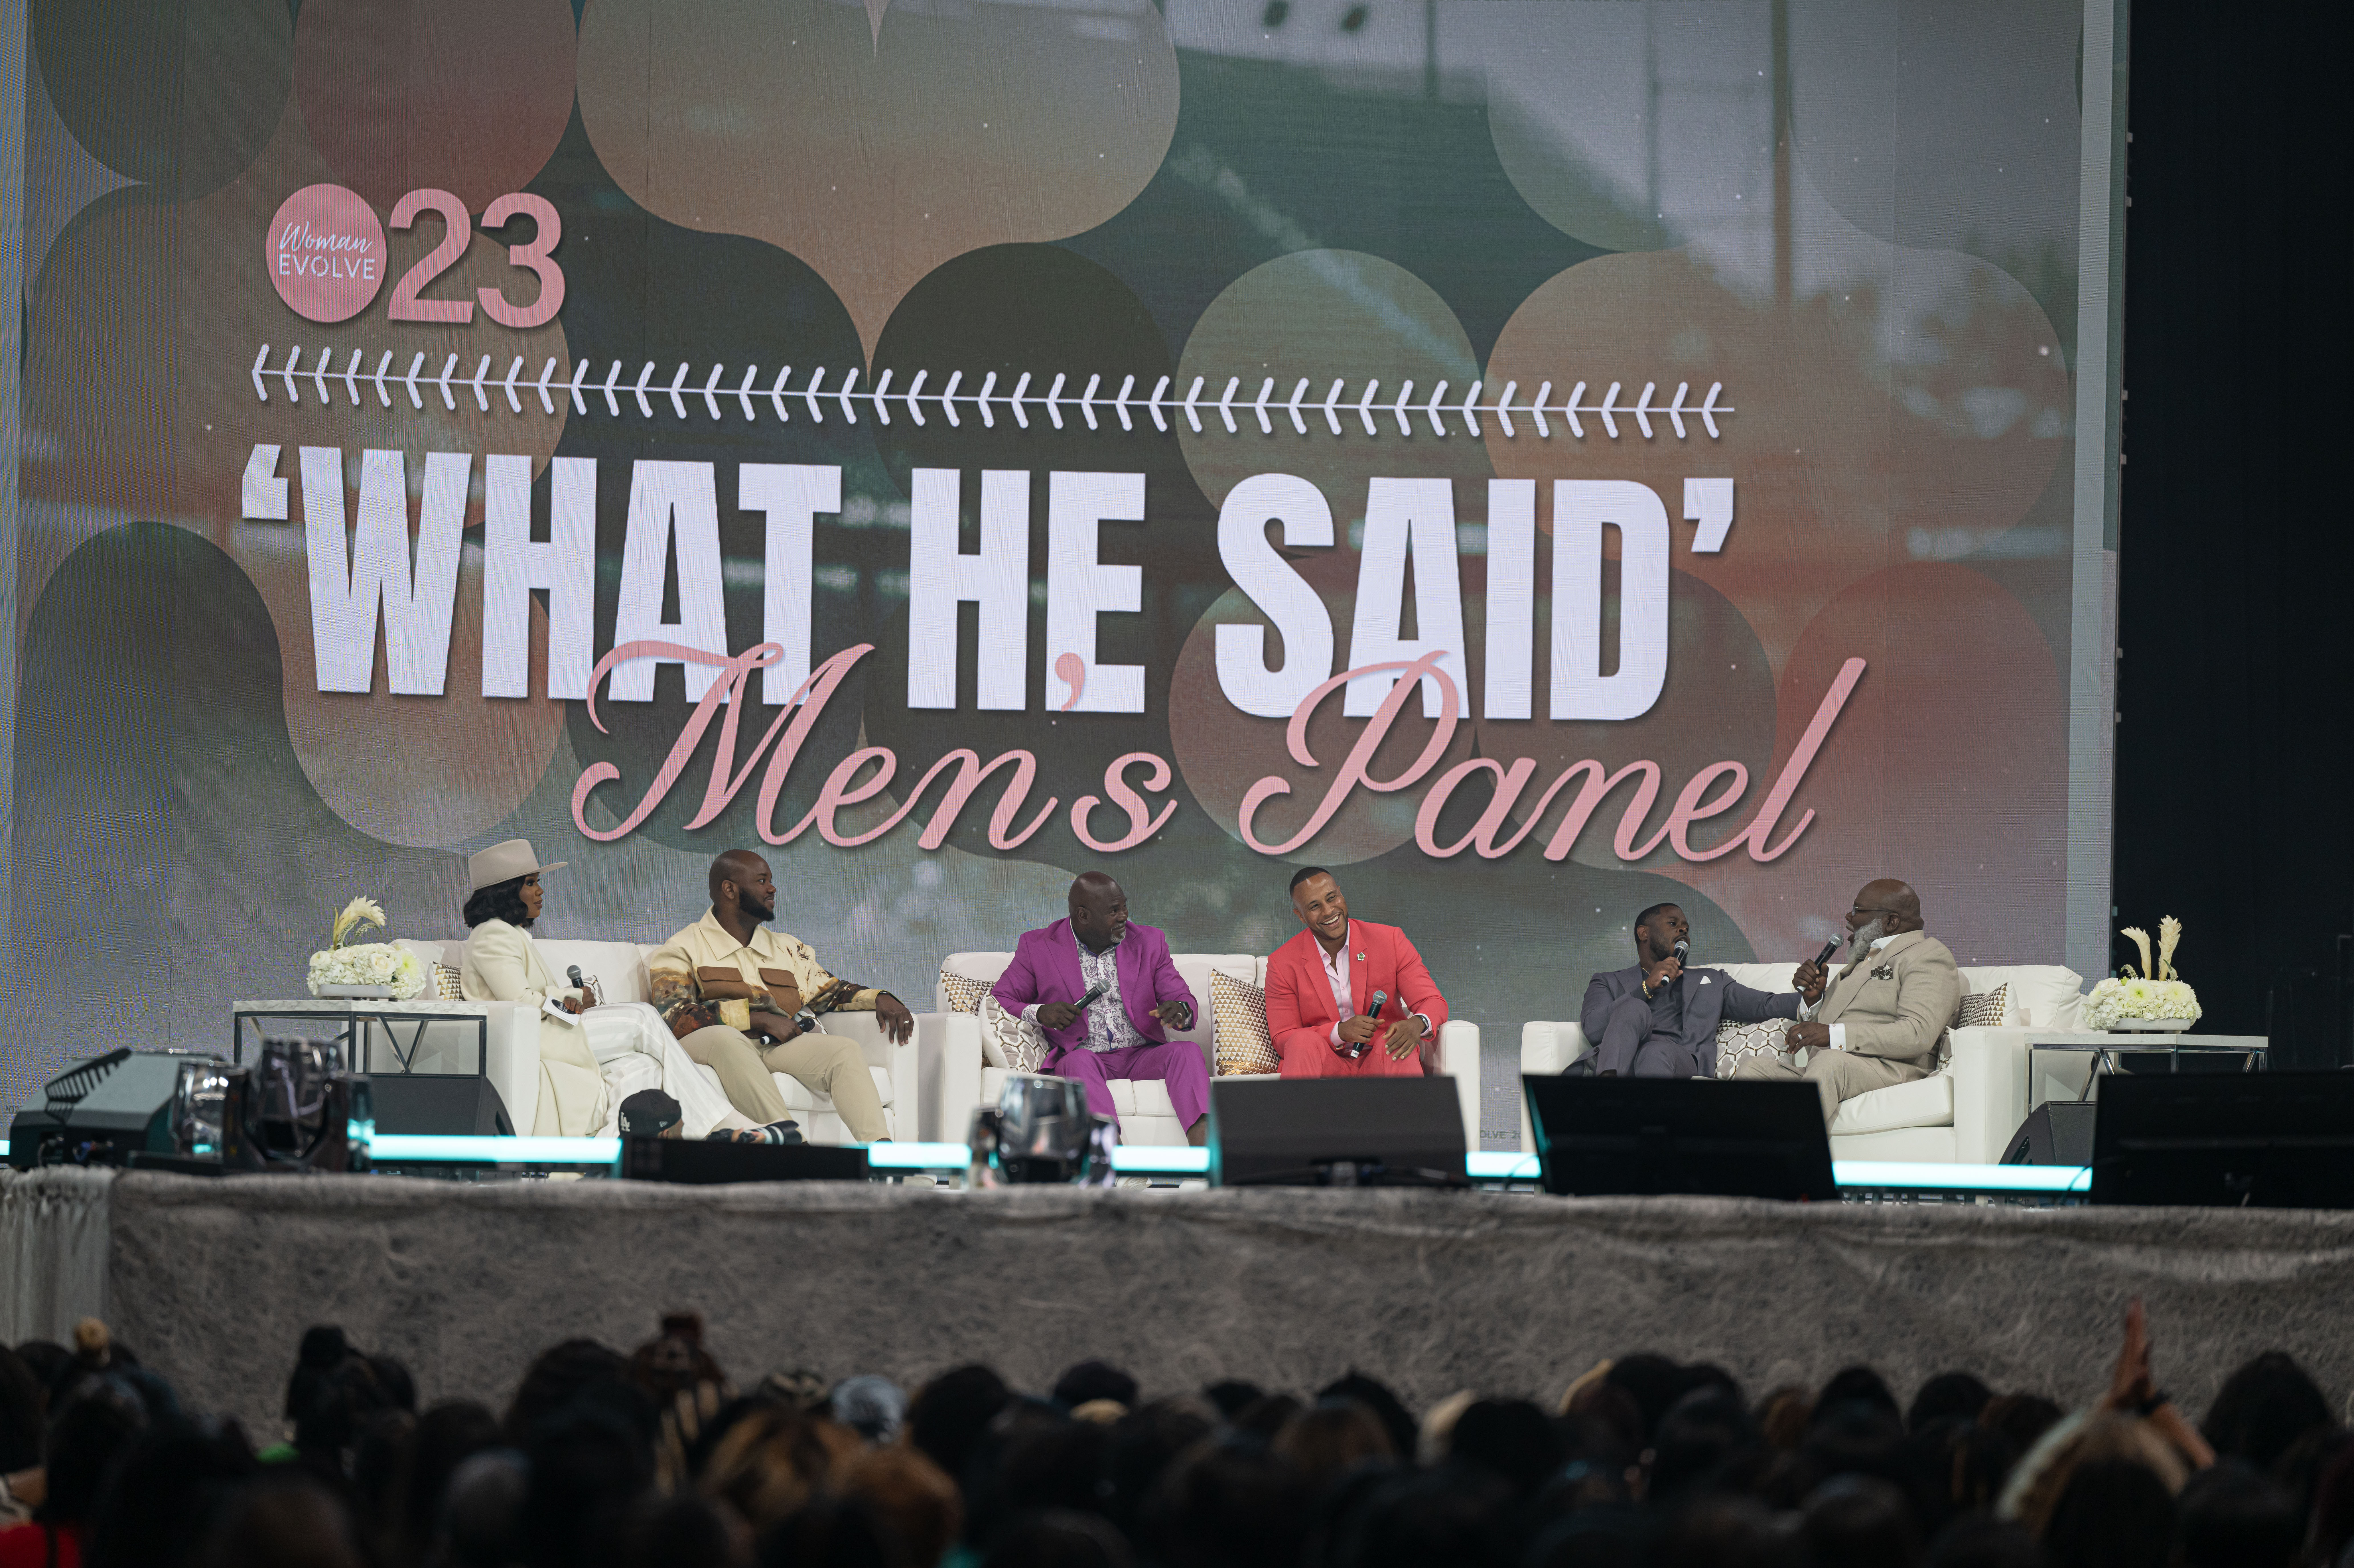 Sarah Jakes Roberts, Jermaine Jakes, David Mann, DeVon Franklin, Anthony O'Neal, and Bishop T.D. Jakes speaks on stage at the Woman Evolve 2023 on September 16, 2023, in Arlington, Texas. | Source: Getty Images